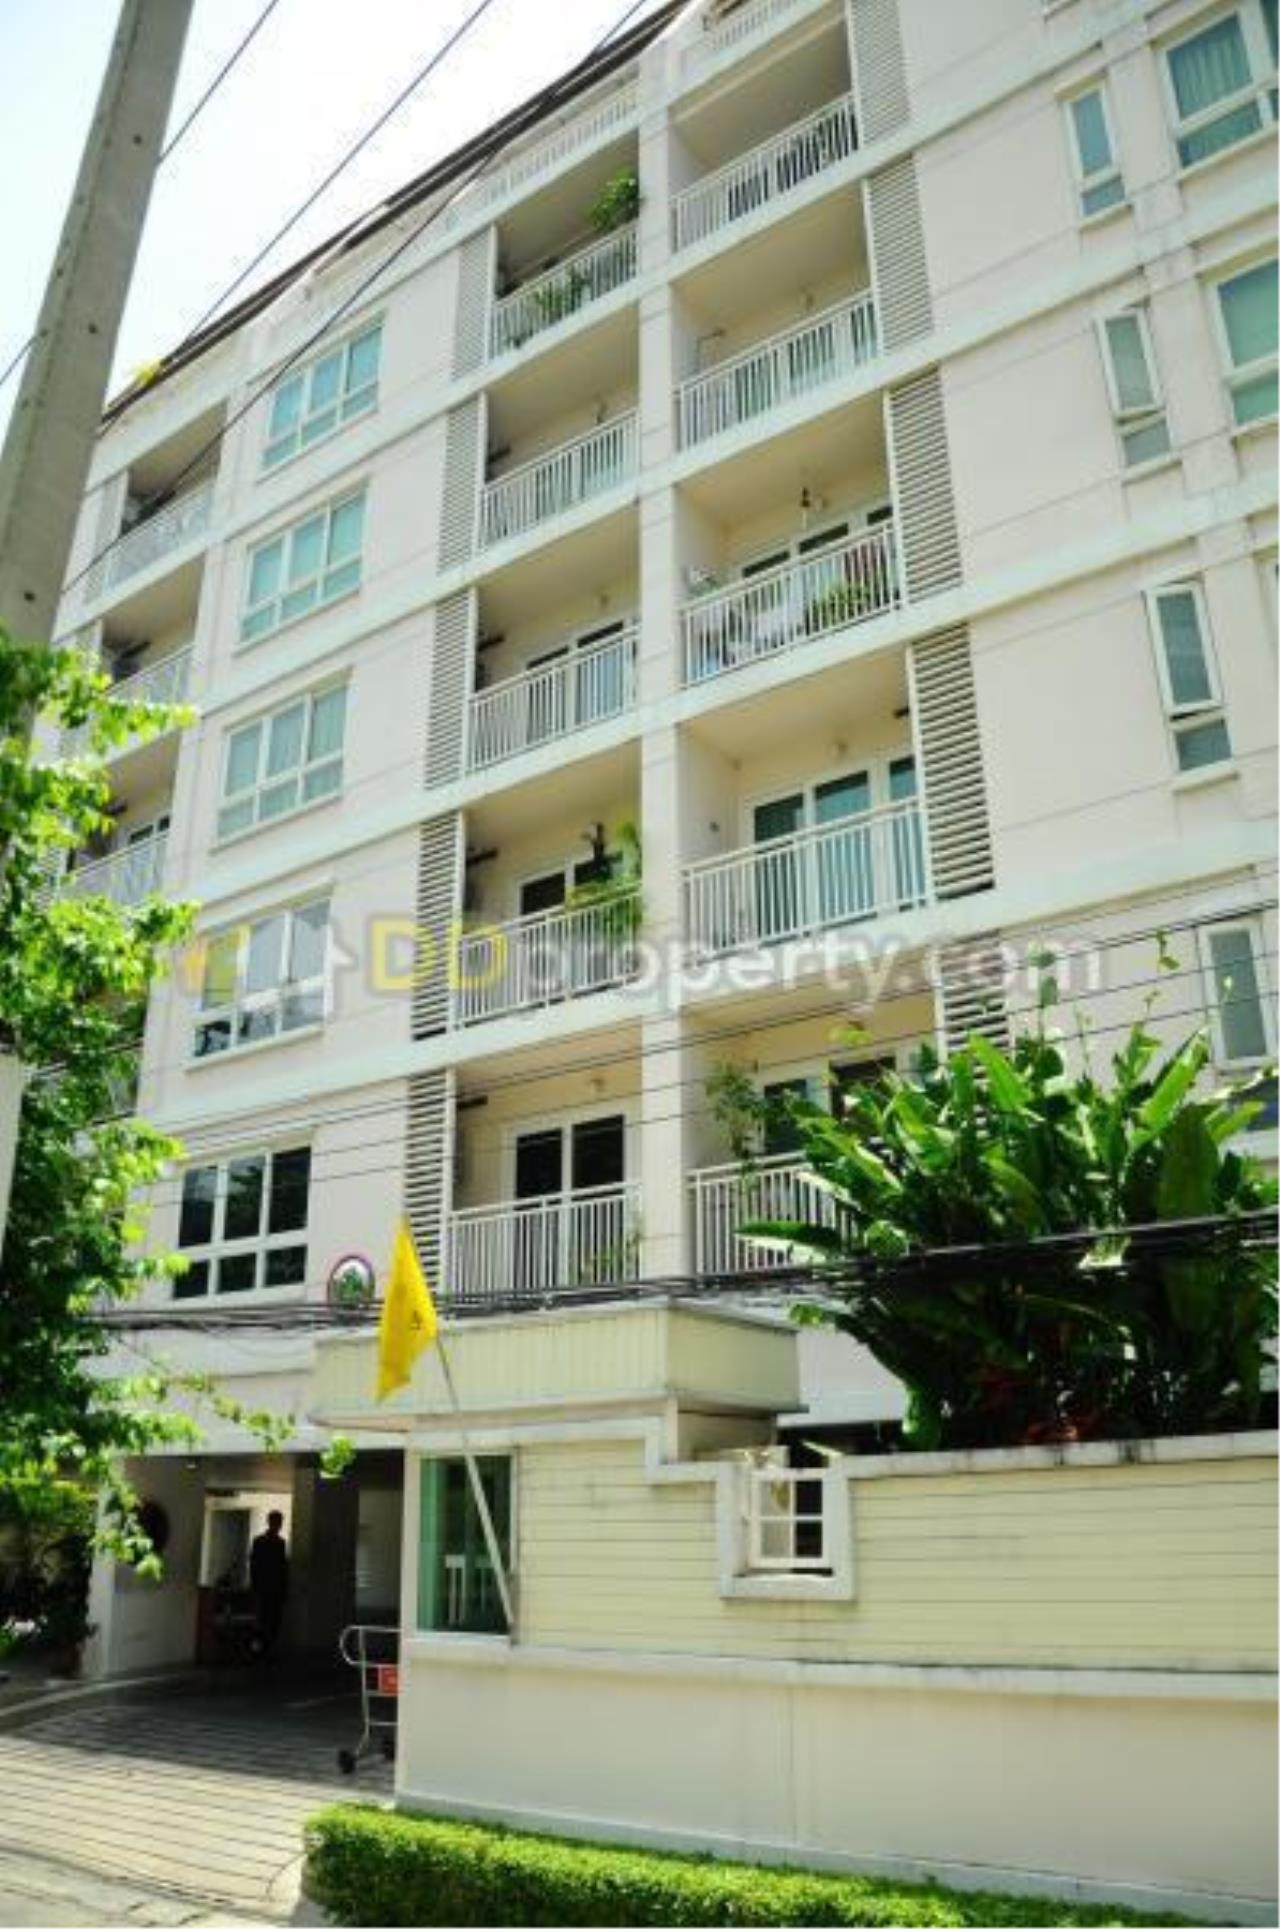 Quality Life Property Agency's Condo 1 Bedroom For Rent At Baan Siri Sukhumvit 13 2